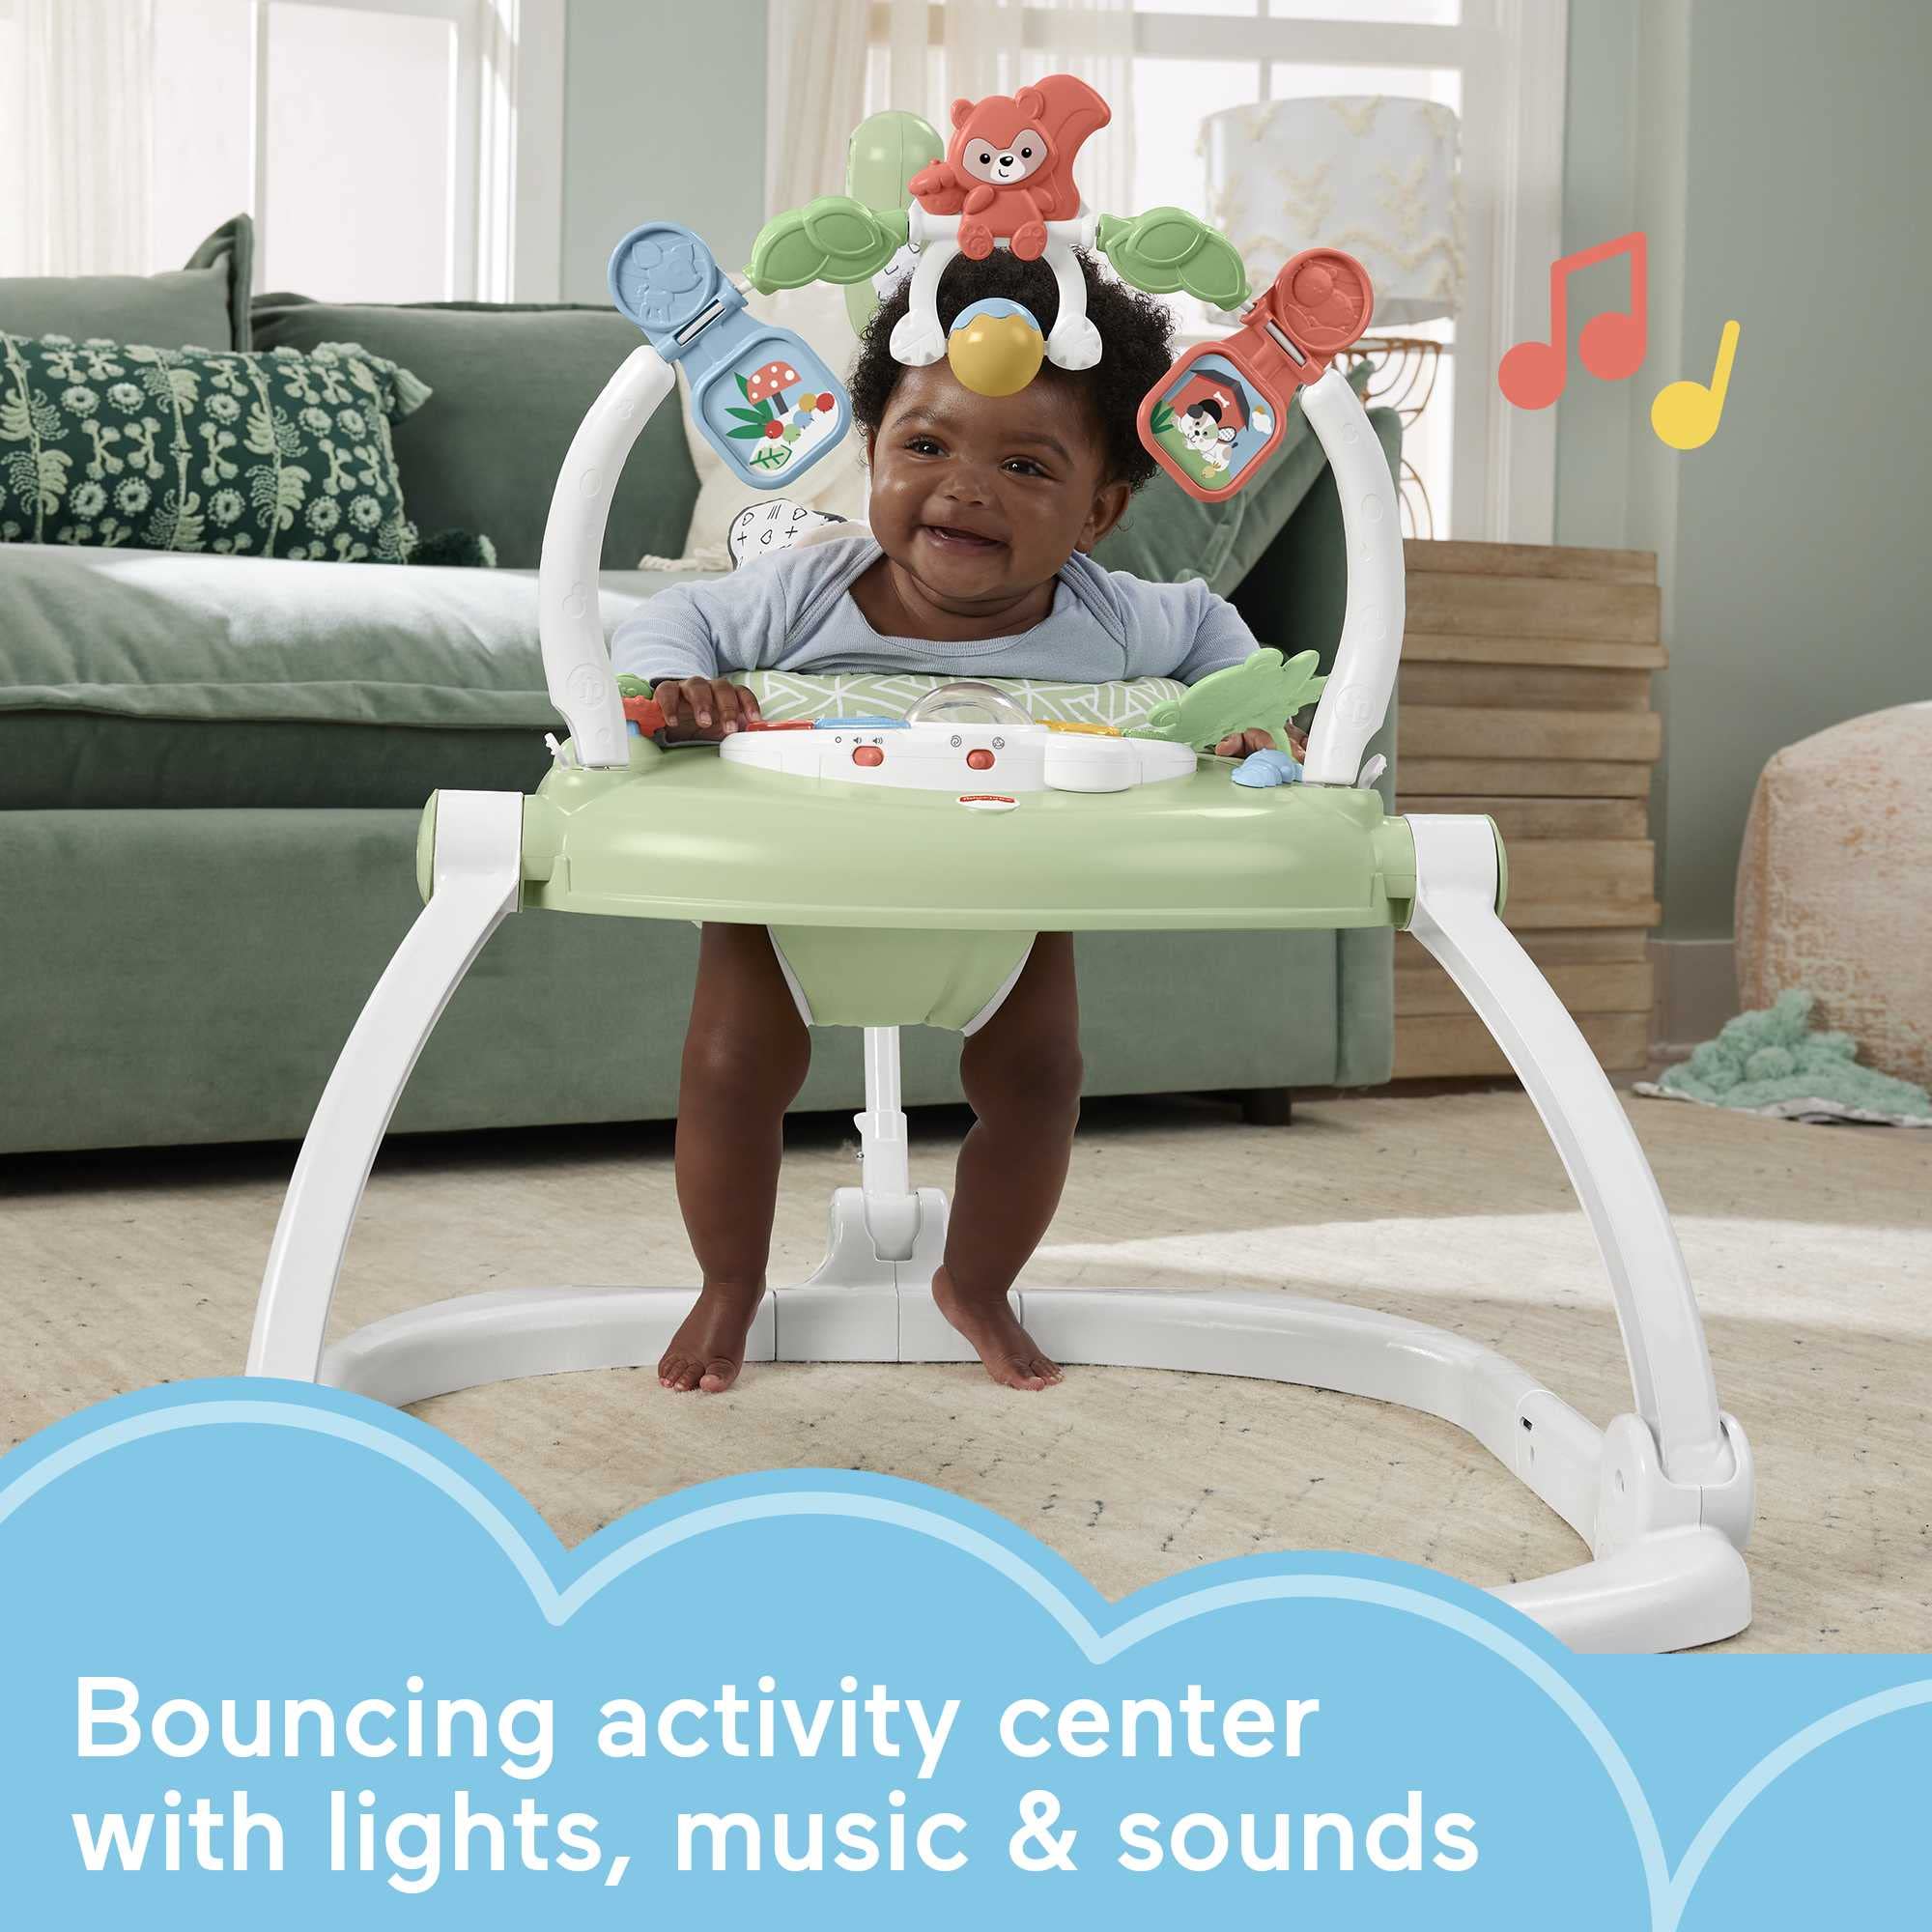 Fisher-Price Baby Bouncer Spacesaver Jumperoo Activity Center With Lights Sounds And Folding Frame, Puppy Perfection